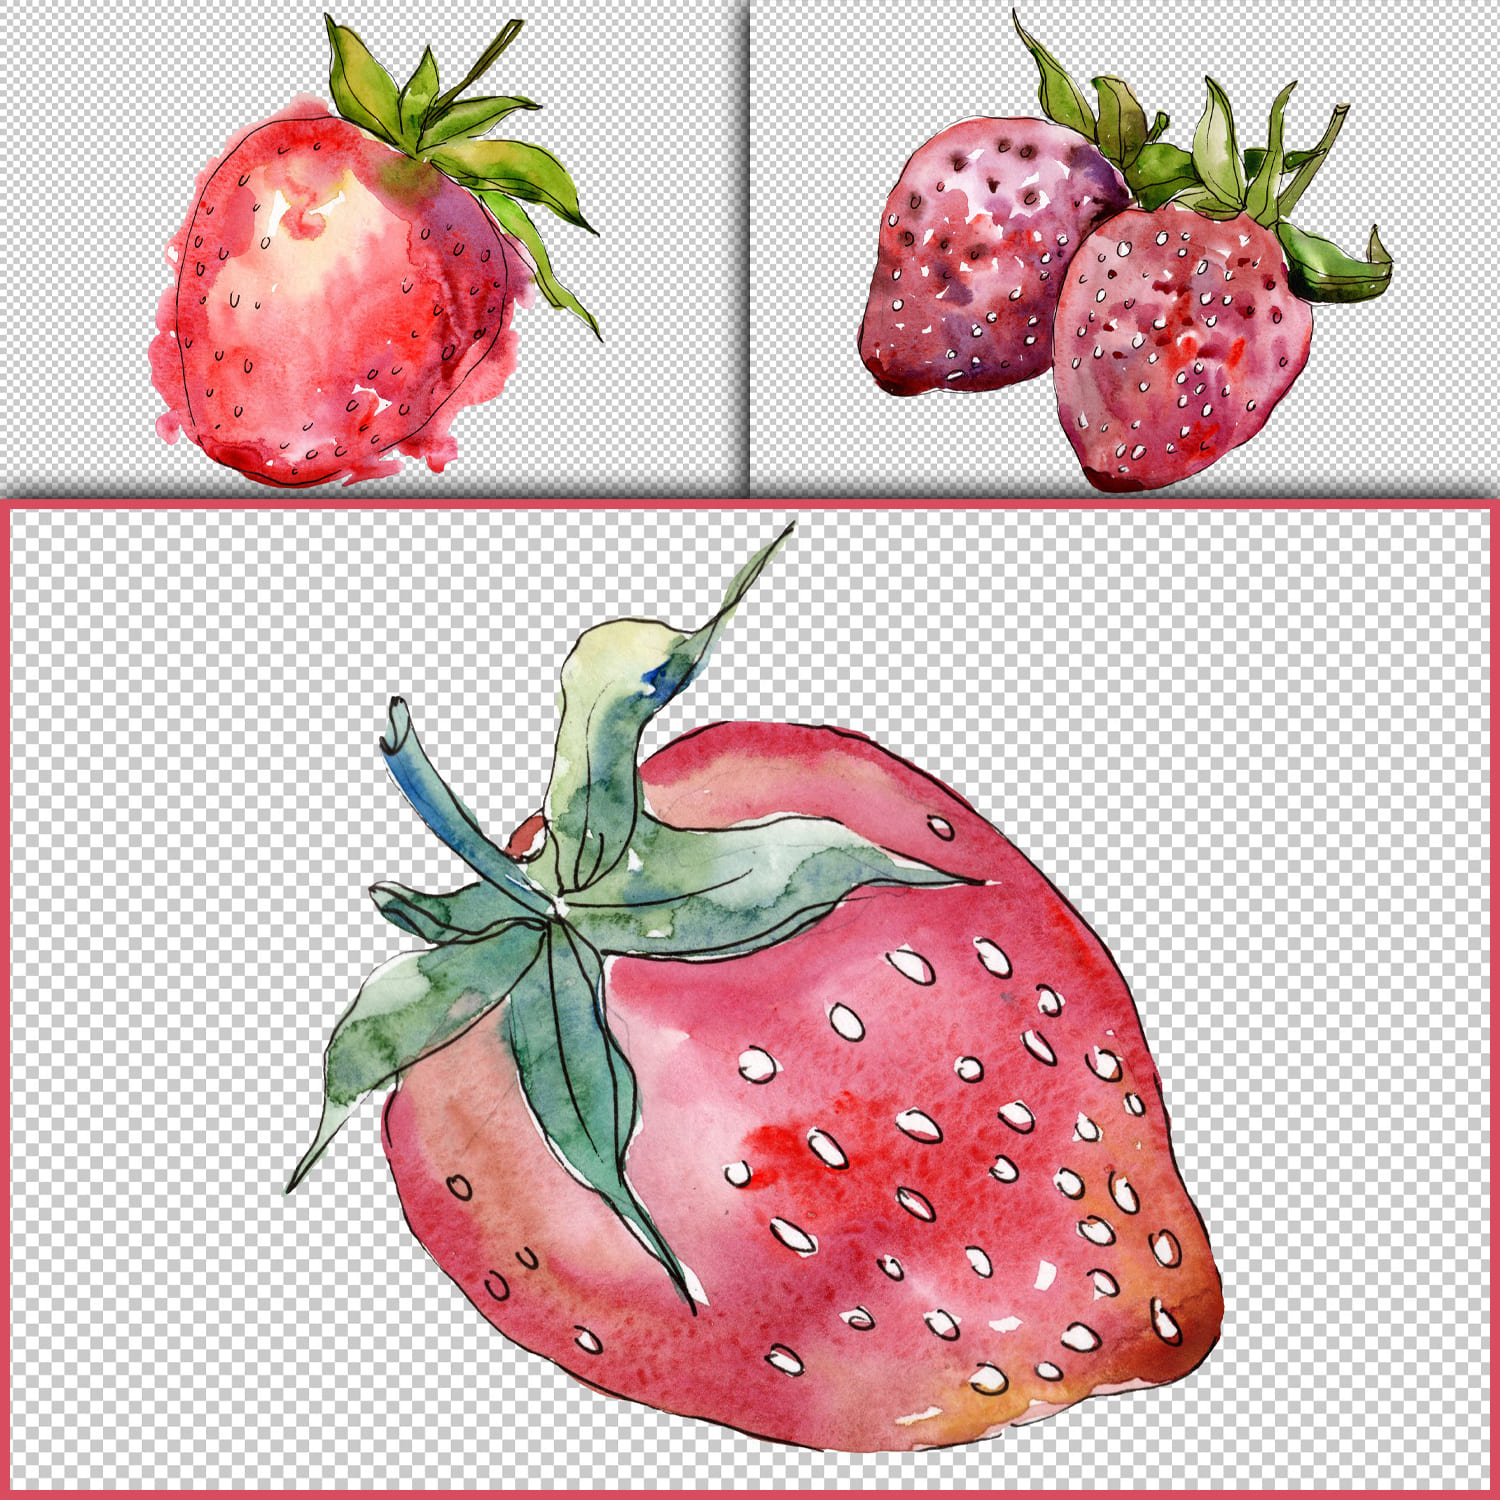 Strawberry cultivar "Malvina" watercolor png cover.